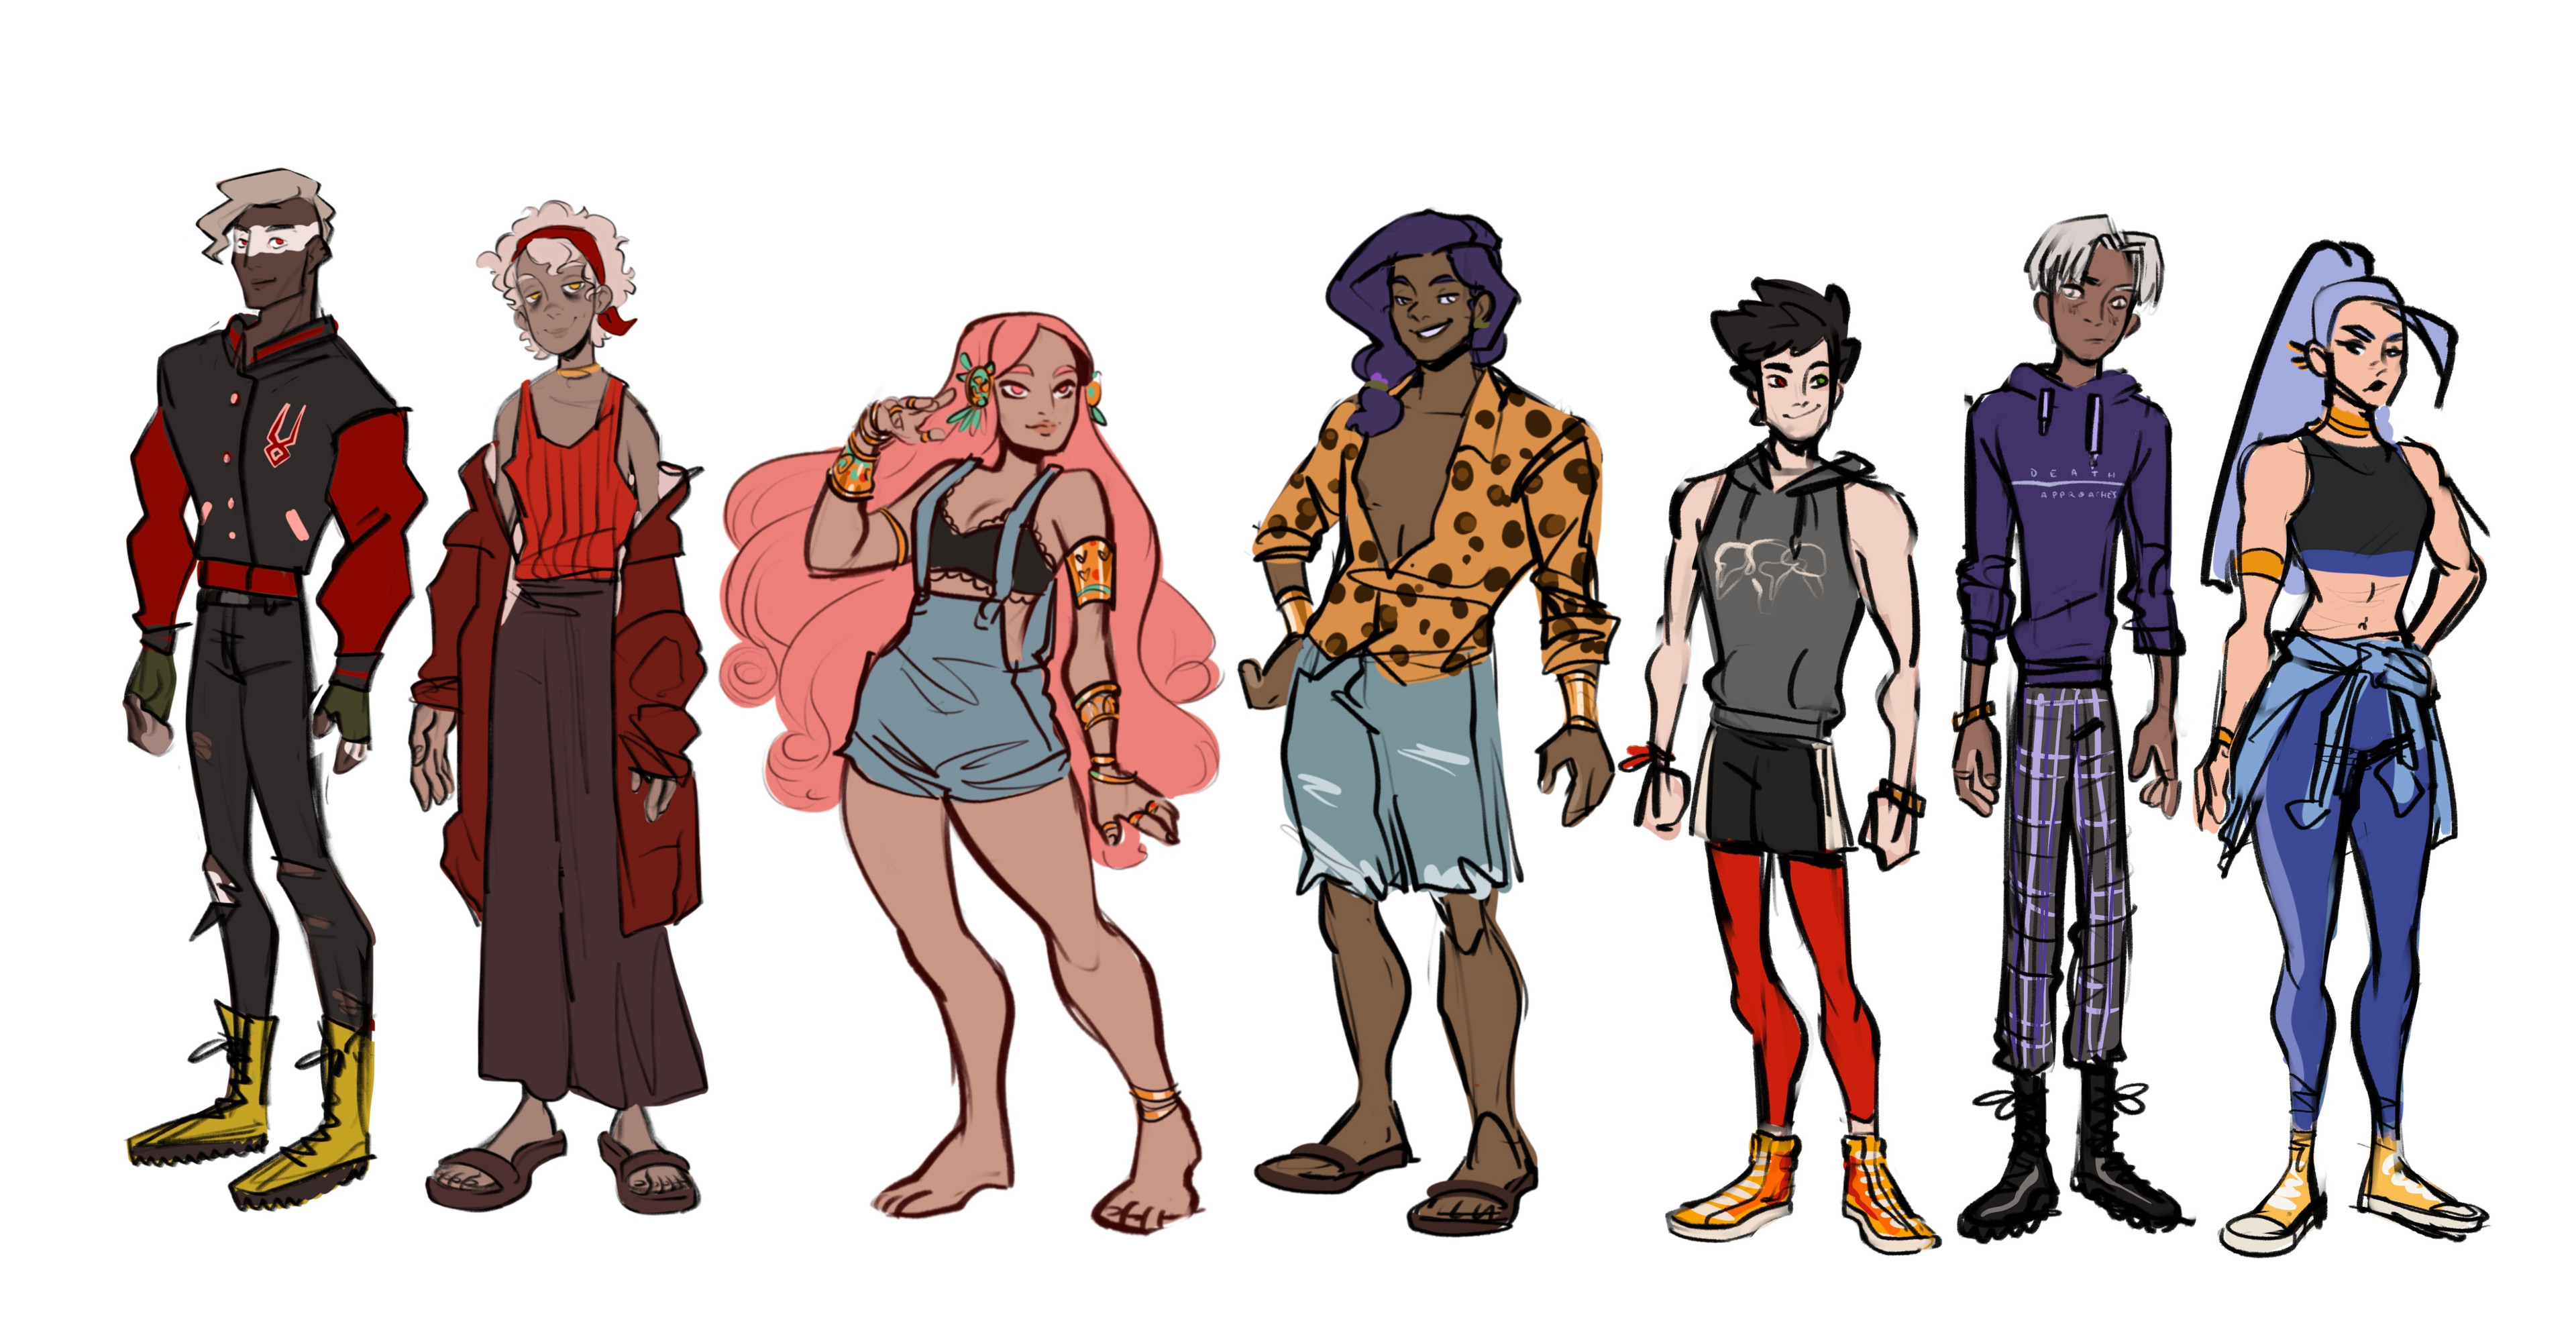 The line up for some of the characters who would appear in the comic, I ended up showing Artemis as well, but I had to make her design on the go since it was a last minute decision.